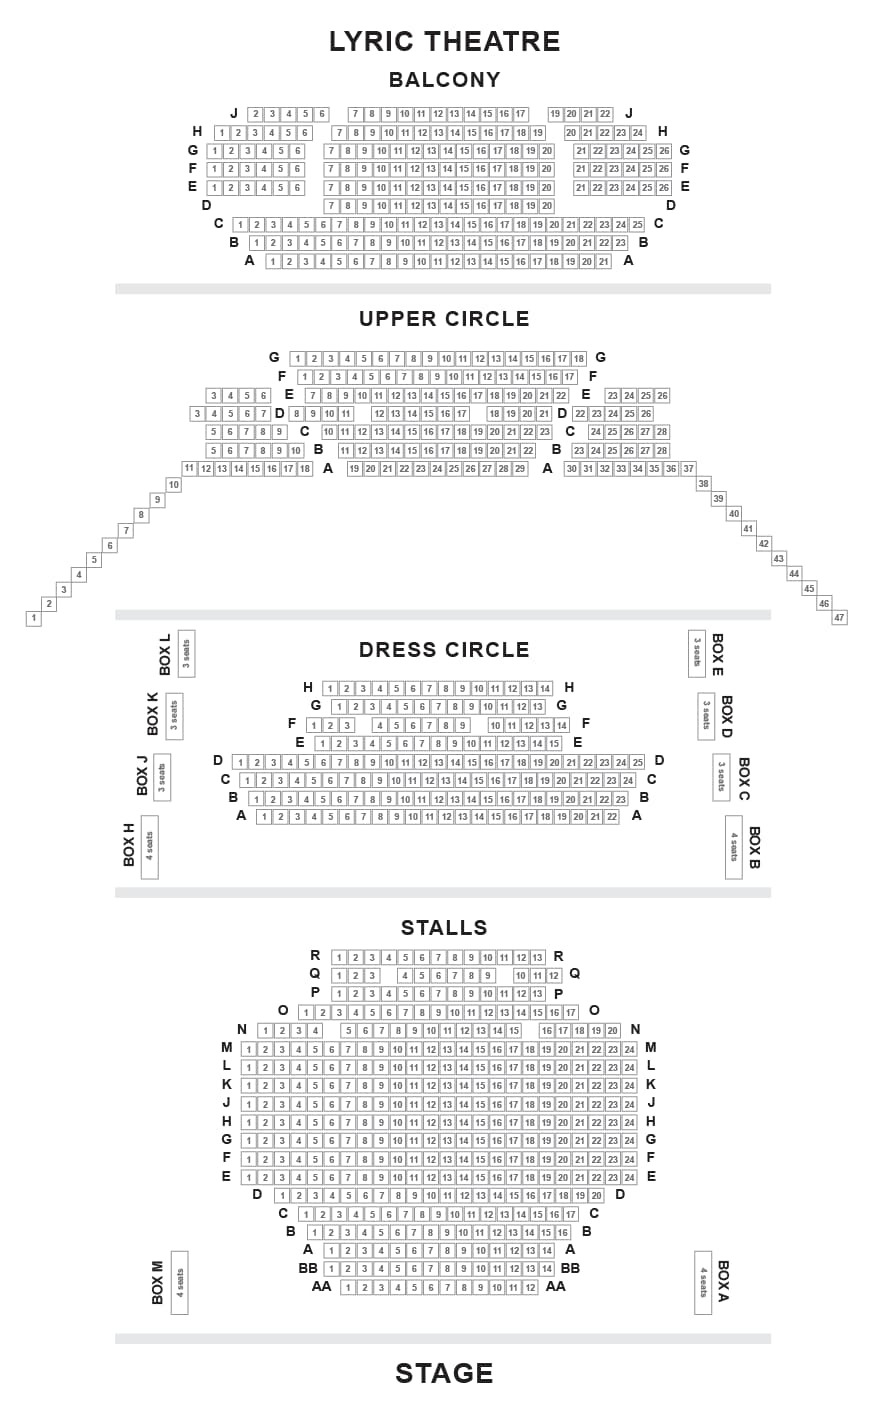 The Lyric Theatre Best Seats and Seating Plan